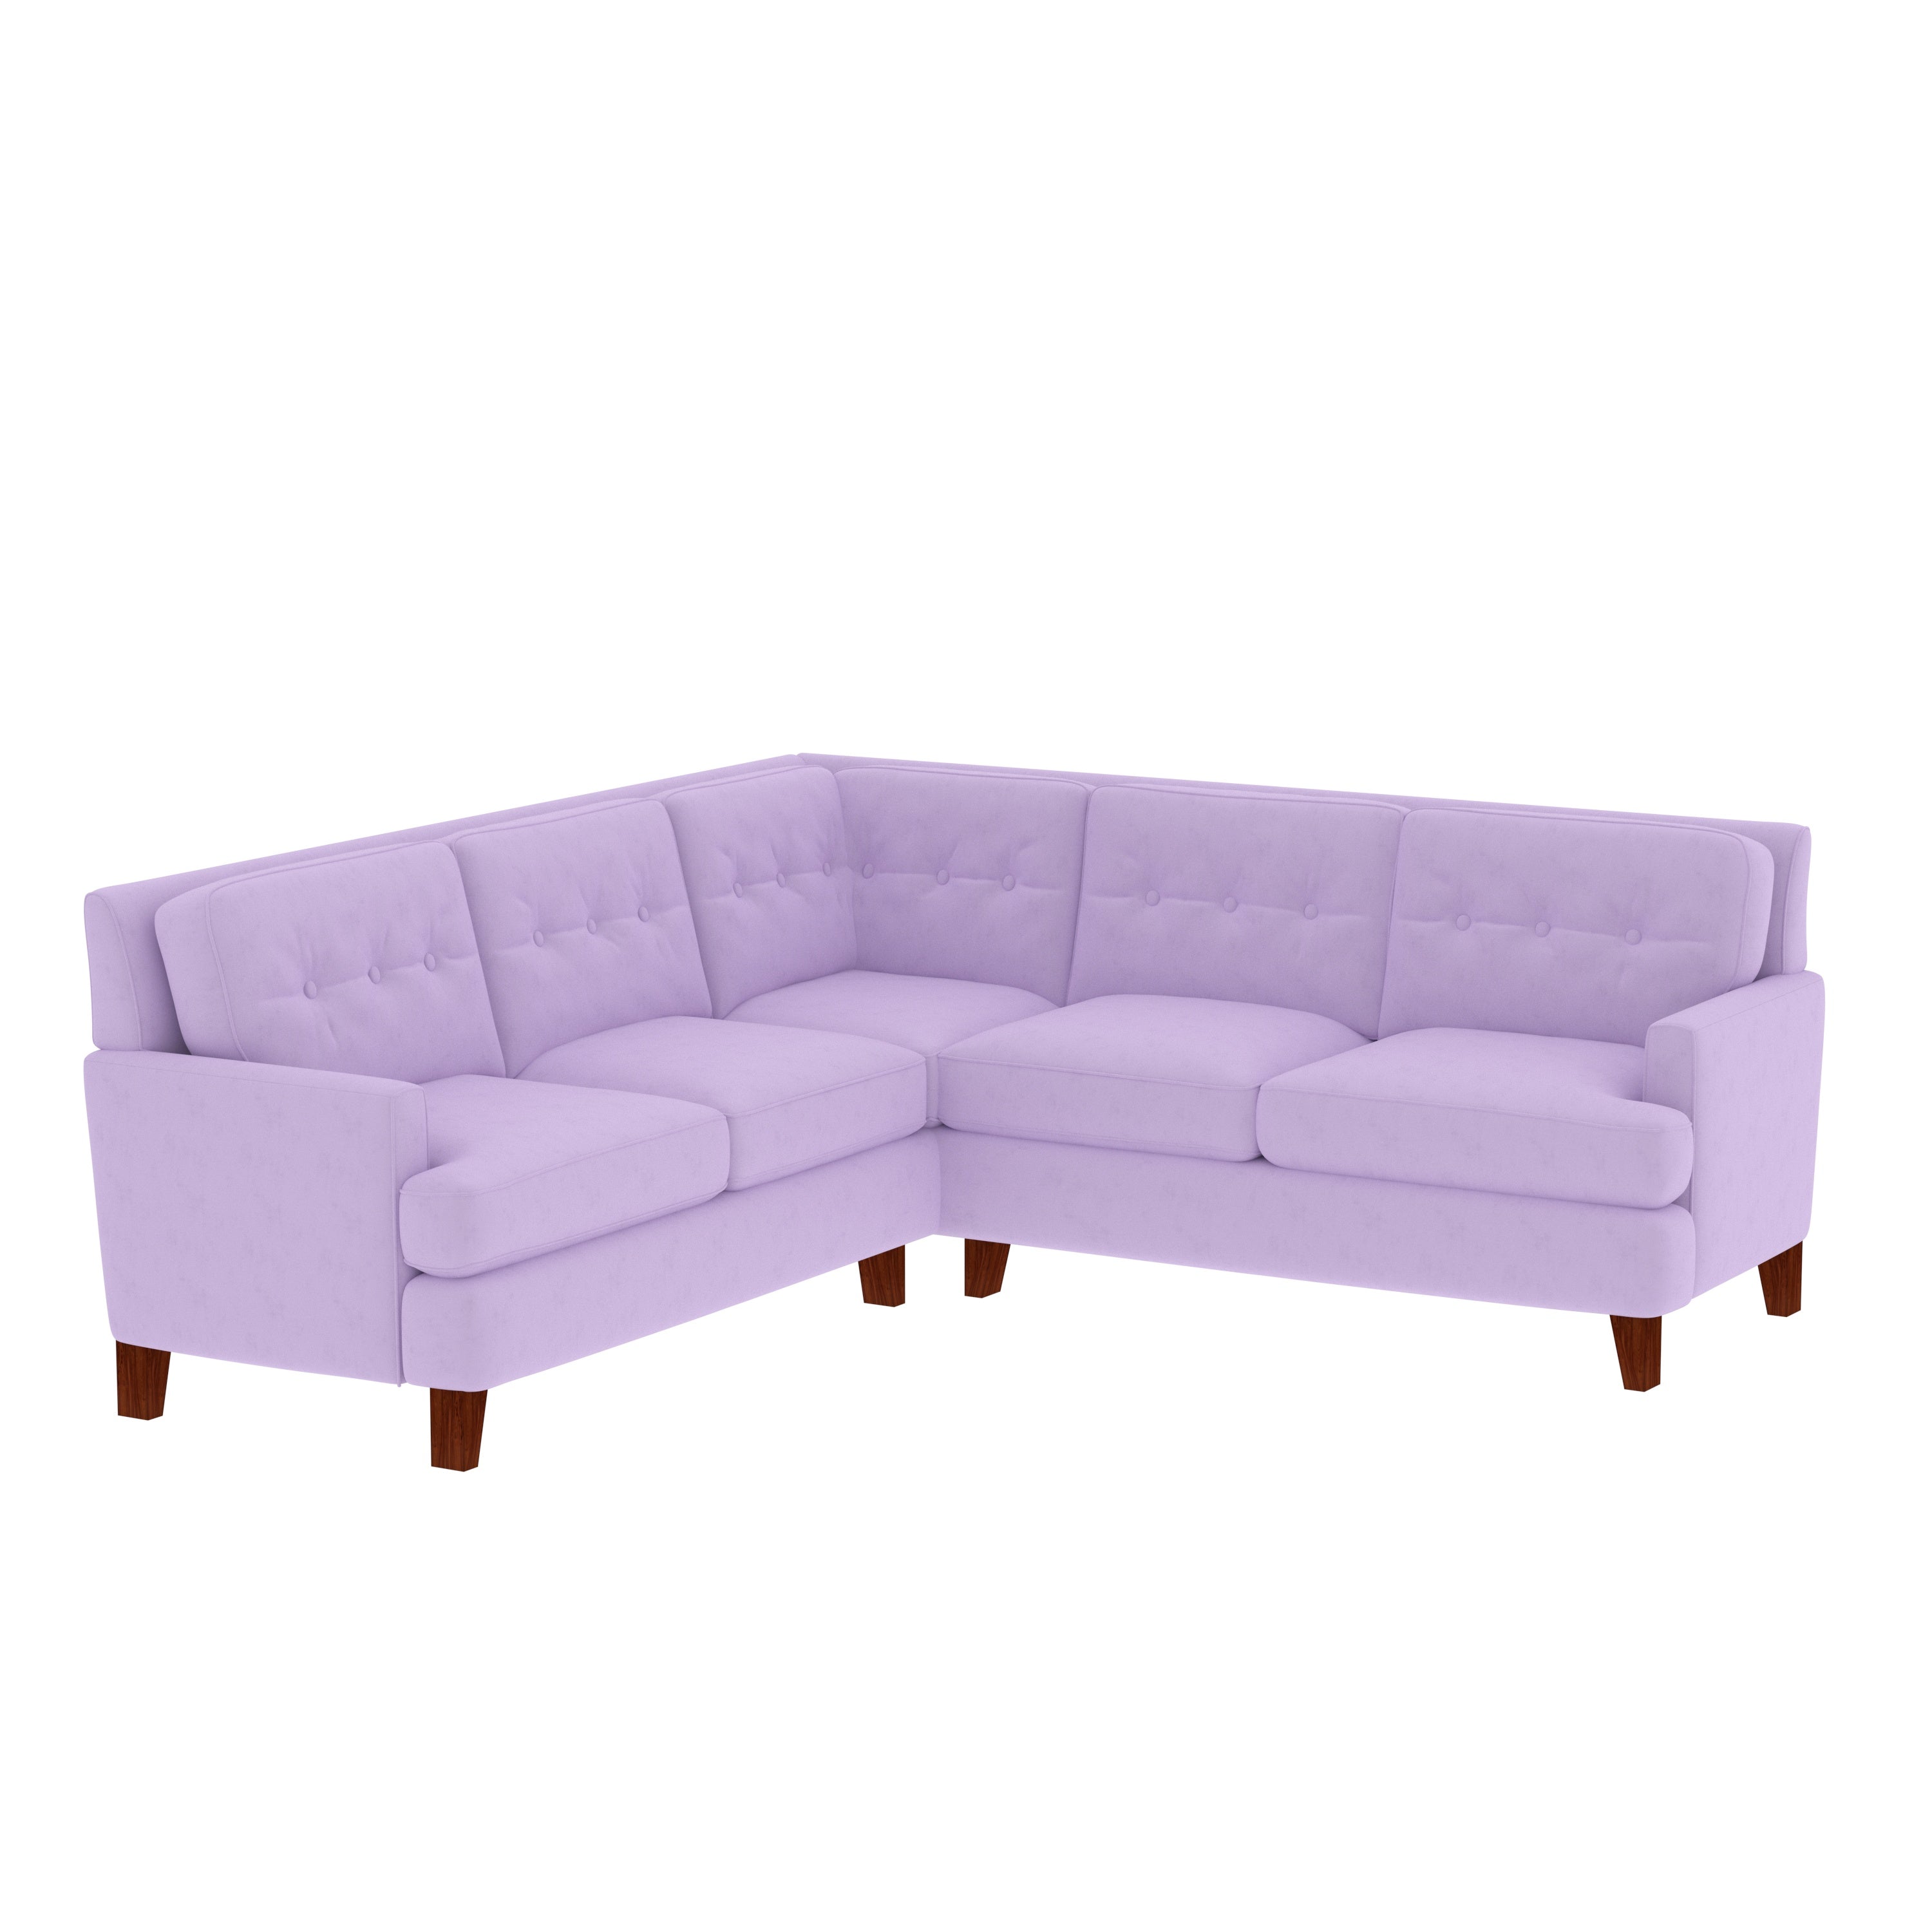 Voilet Pink Pastel Coloured with Premium Comfort L Shaped 4 Seater Sofa Set for Home Sofa